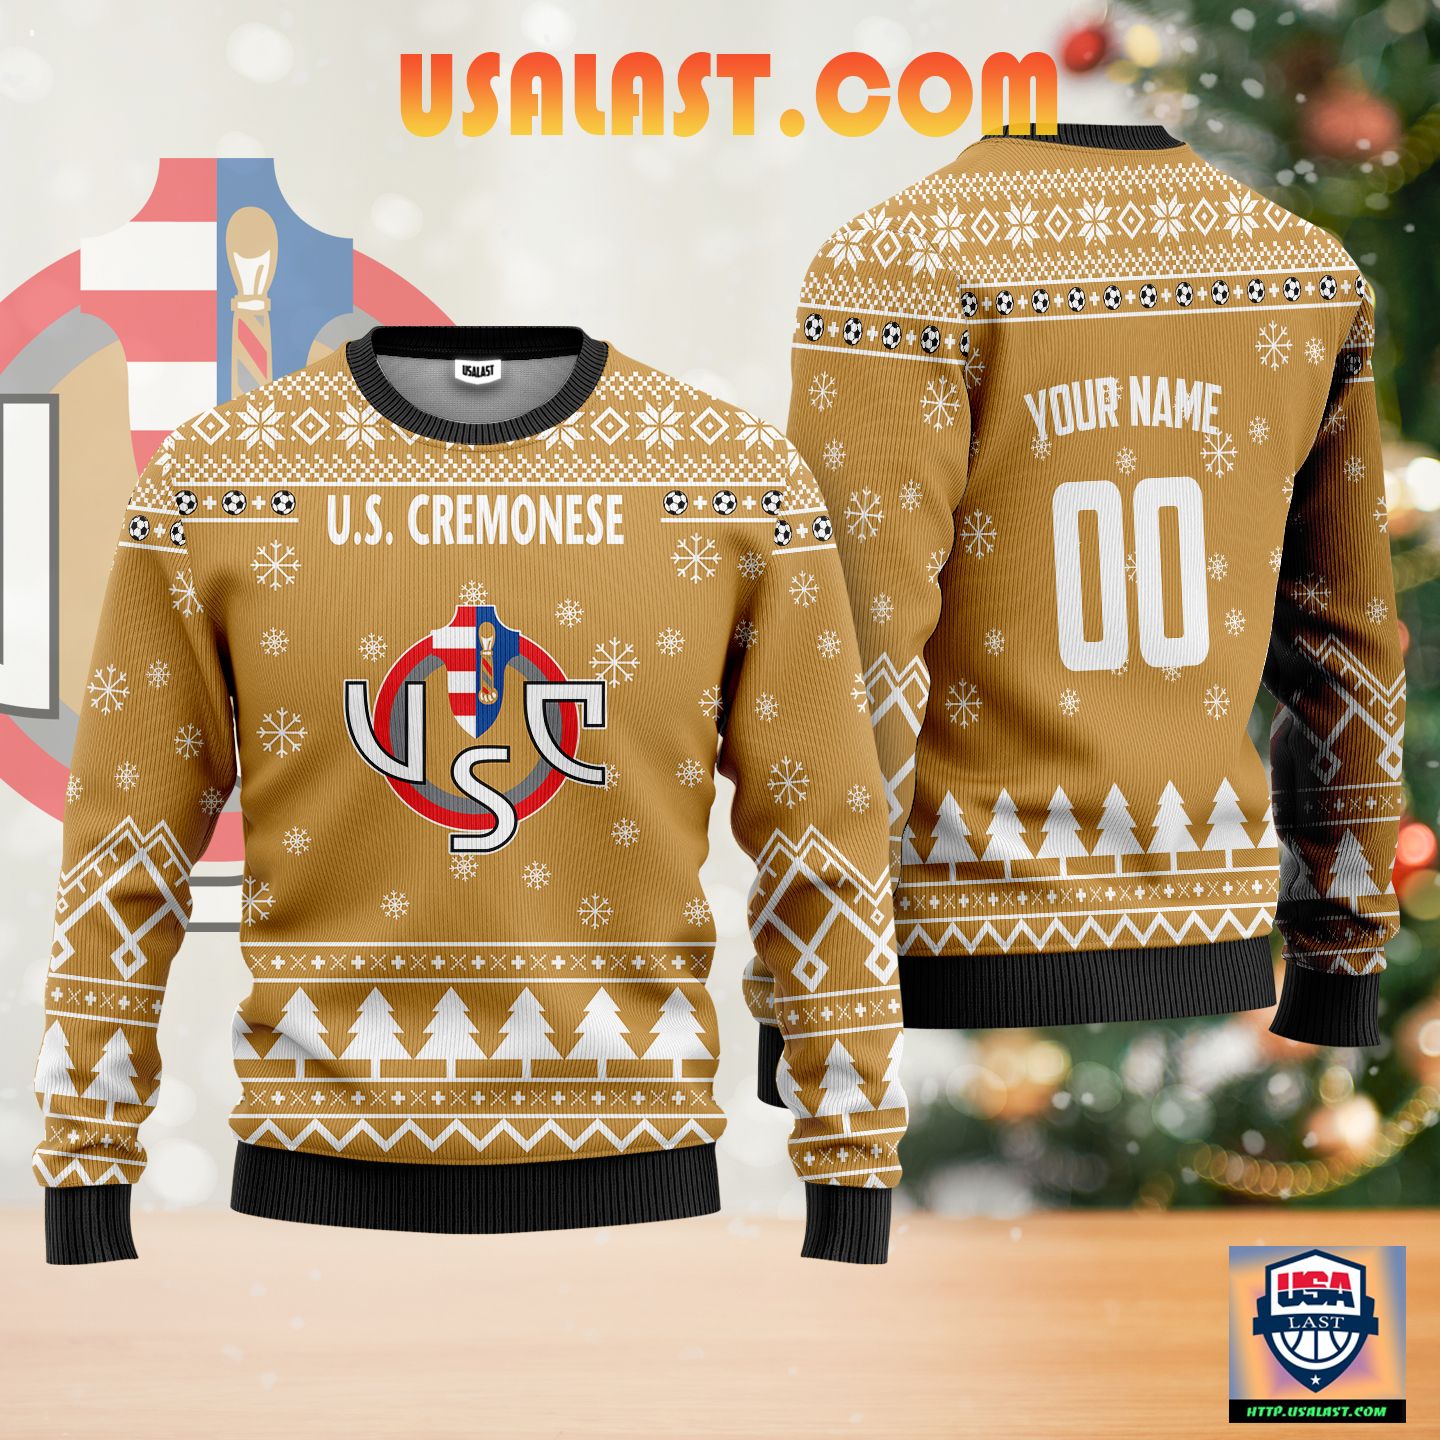 Wholesale U.S. Cremonese Personalized Ugly Christmas Sweater Gold Version